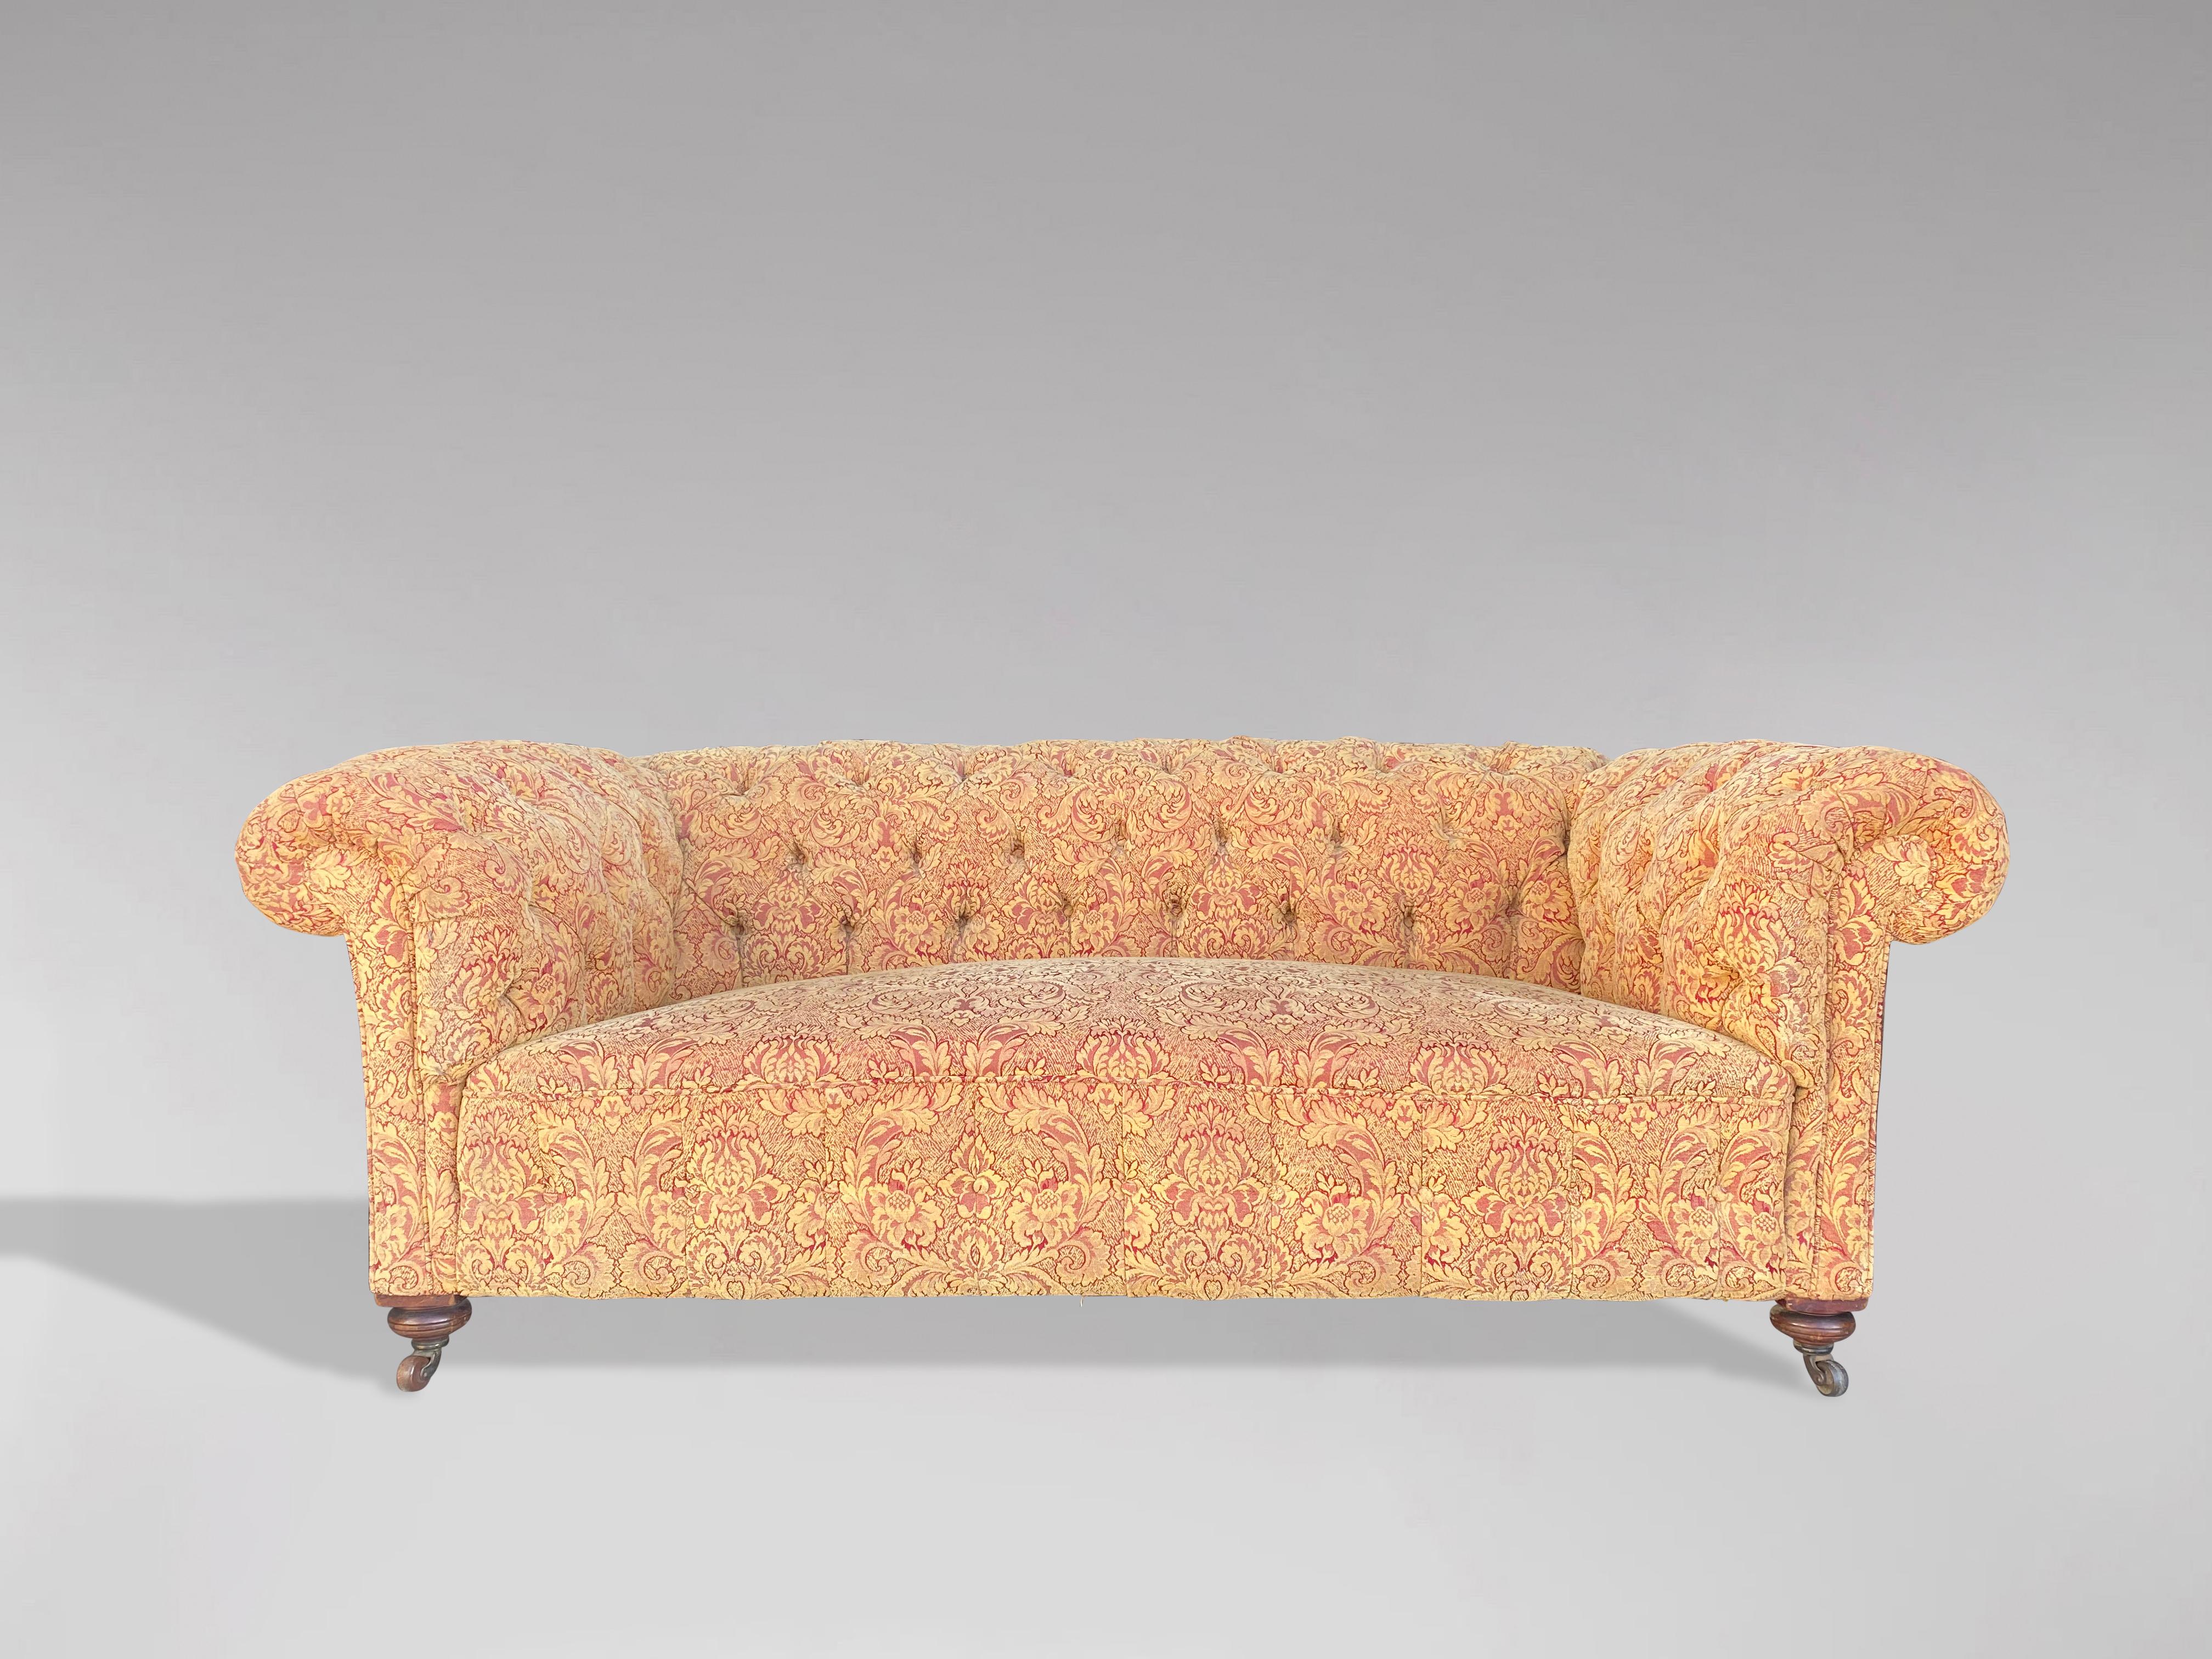 A superb quality Victorian period large 2-seater mahogany framed deep buttoned upholstered chesterfield sofa. Standing on mahogany turned legs terminating in castors. With horsehair stuffing throughout and upholstered in a good quality hard wearing